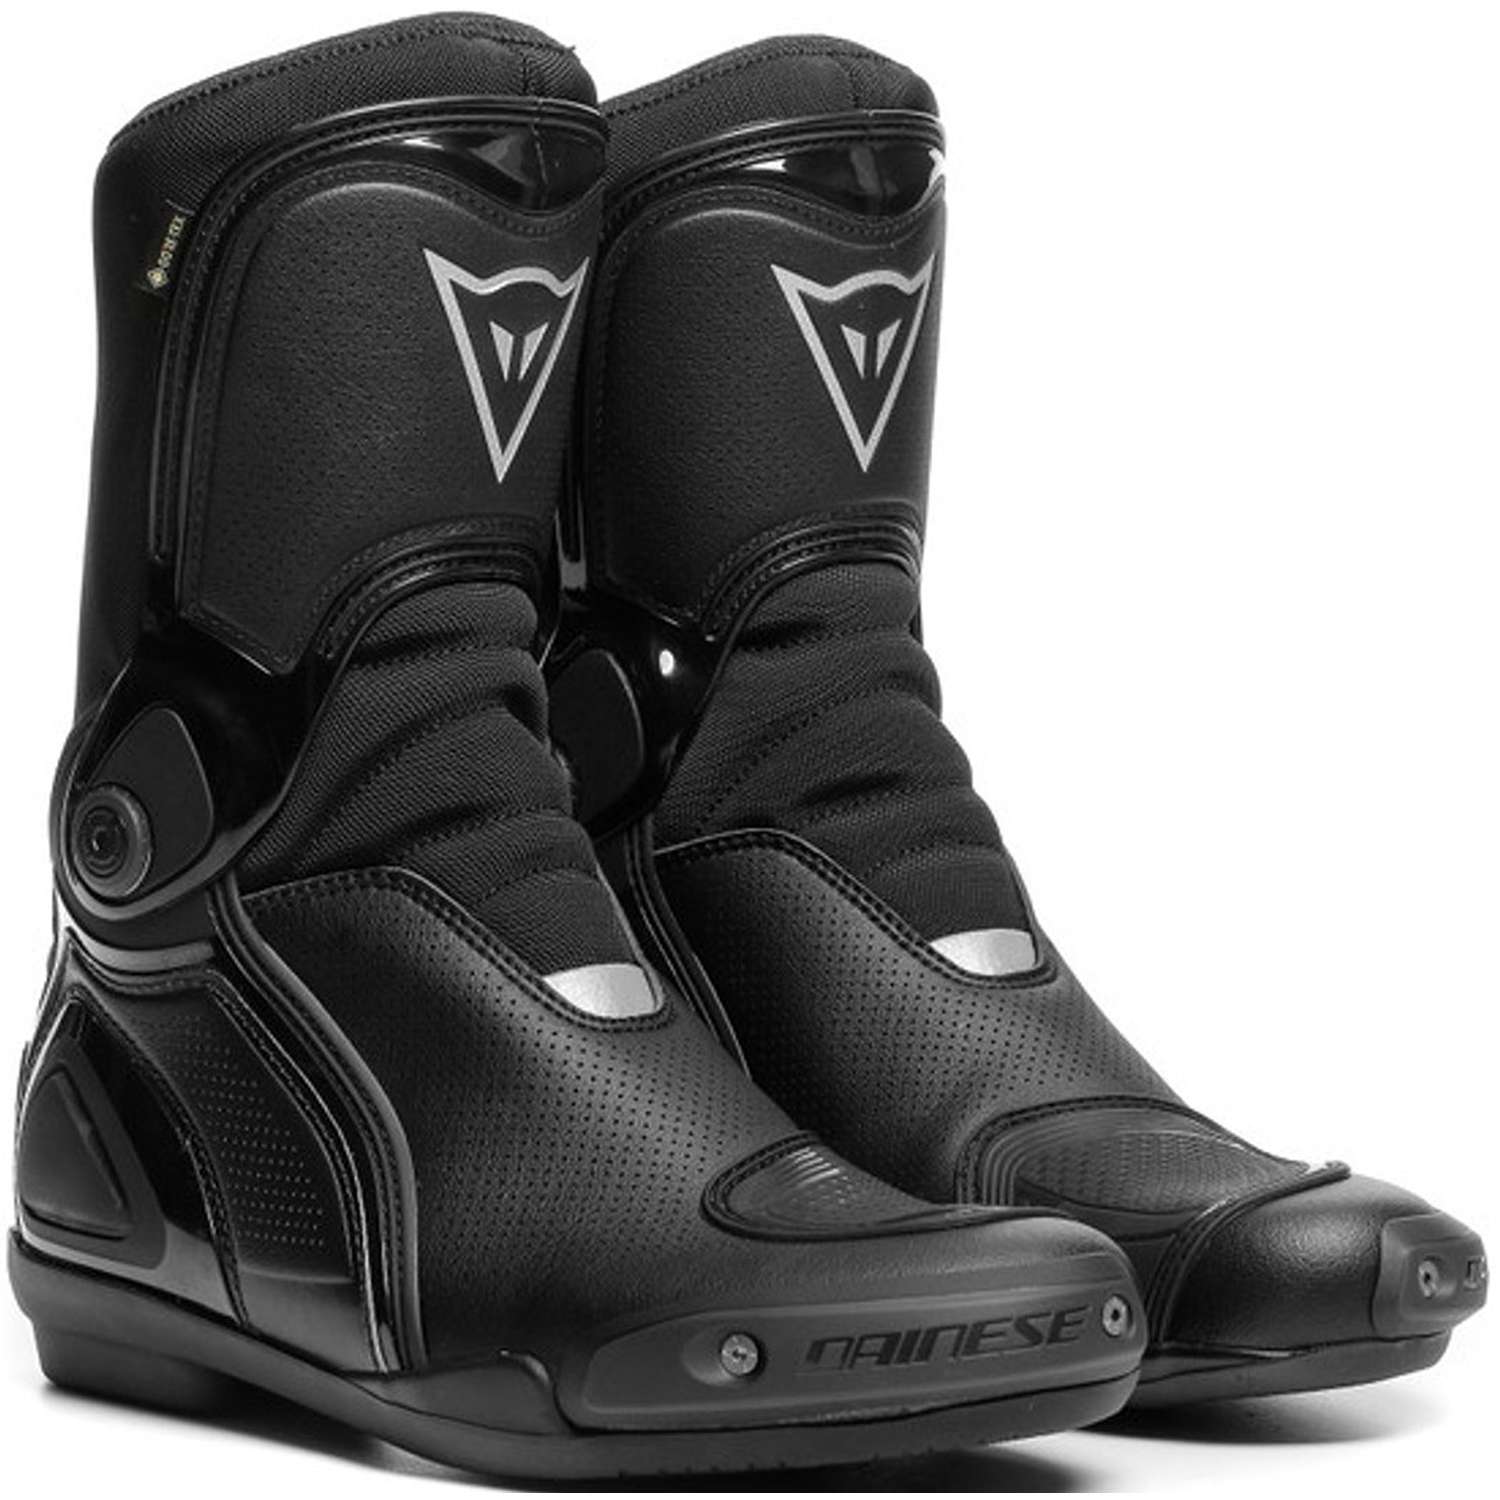 Image of Dainese Sport Master Gore-Tex Boots Black Size 43 ID 8051019215505